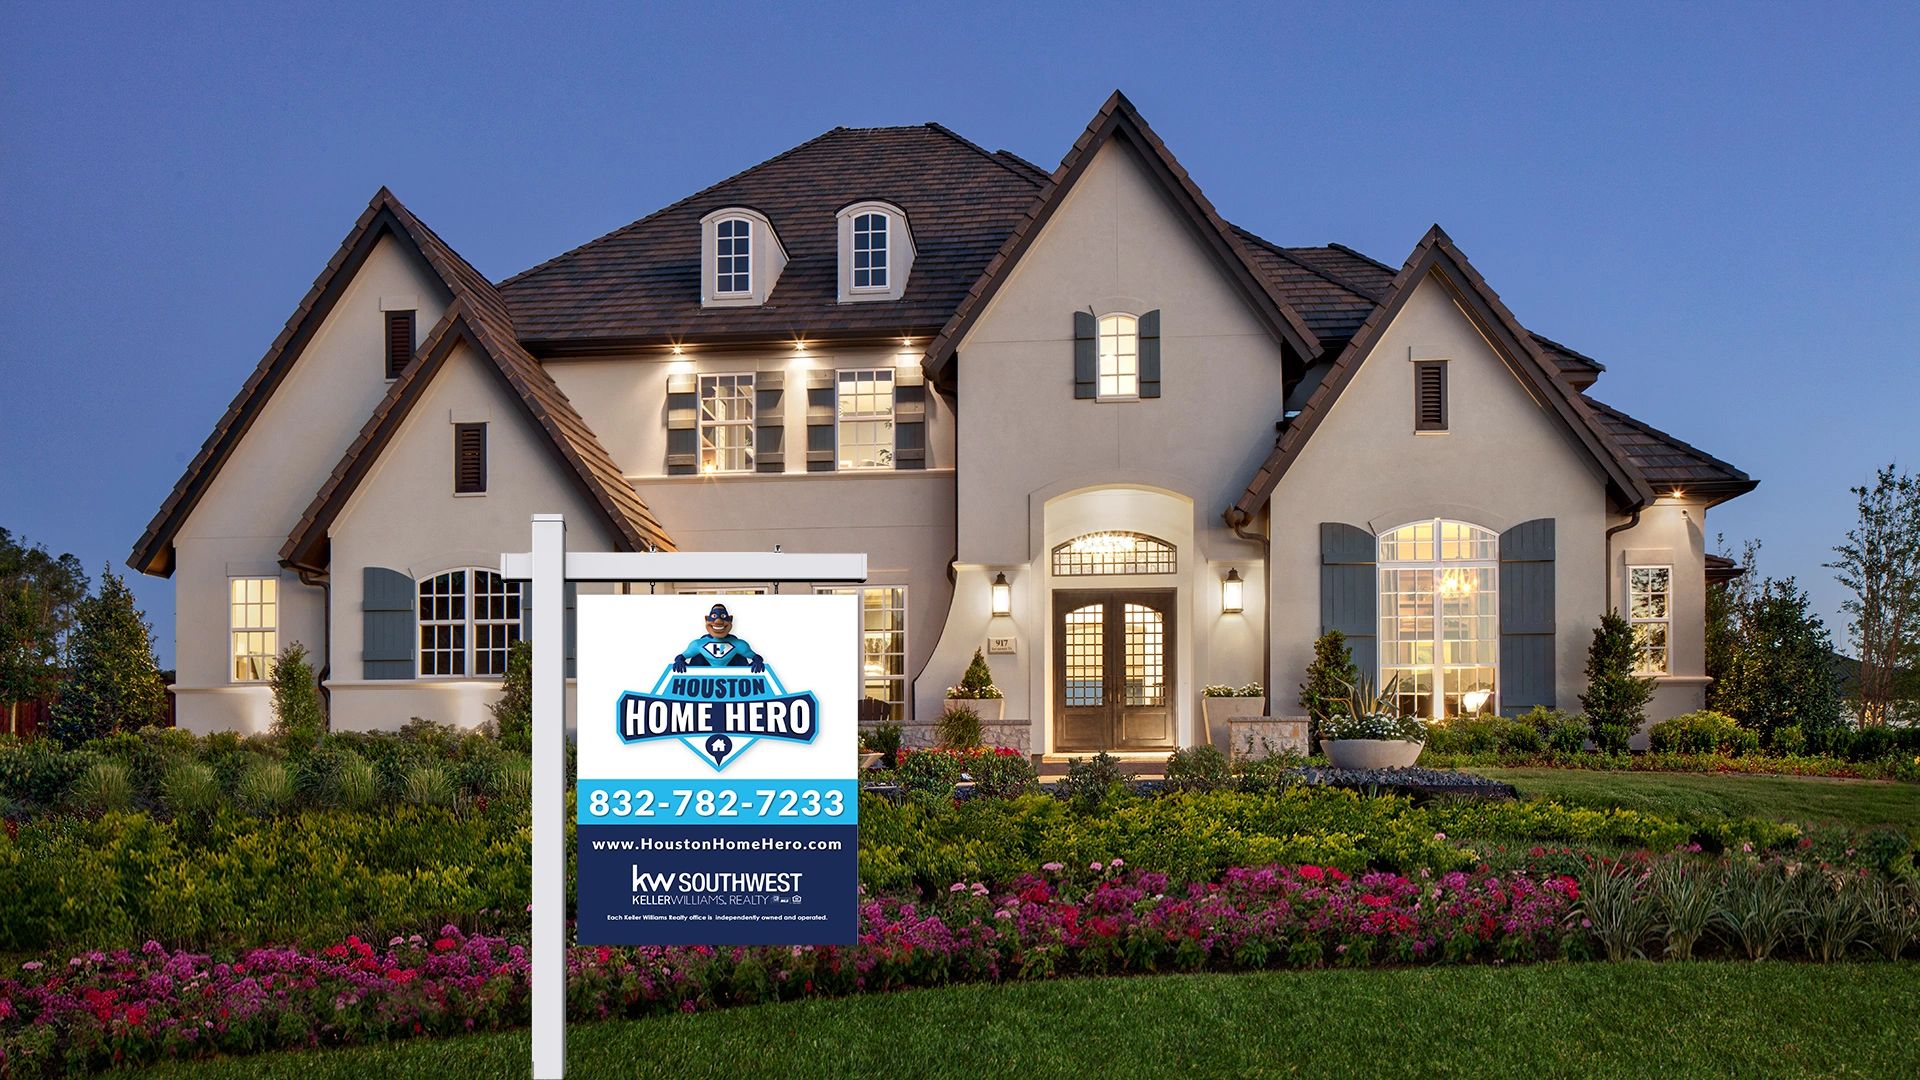 Home Hero - Online Real Estate Services